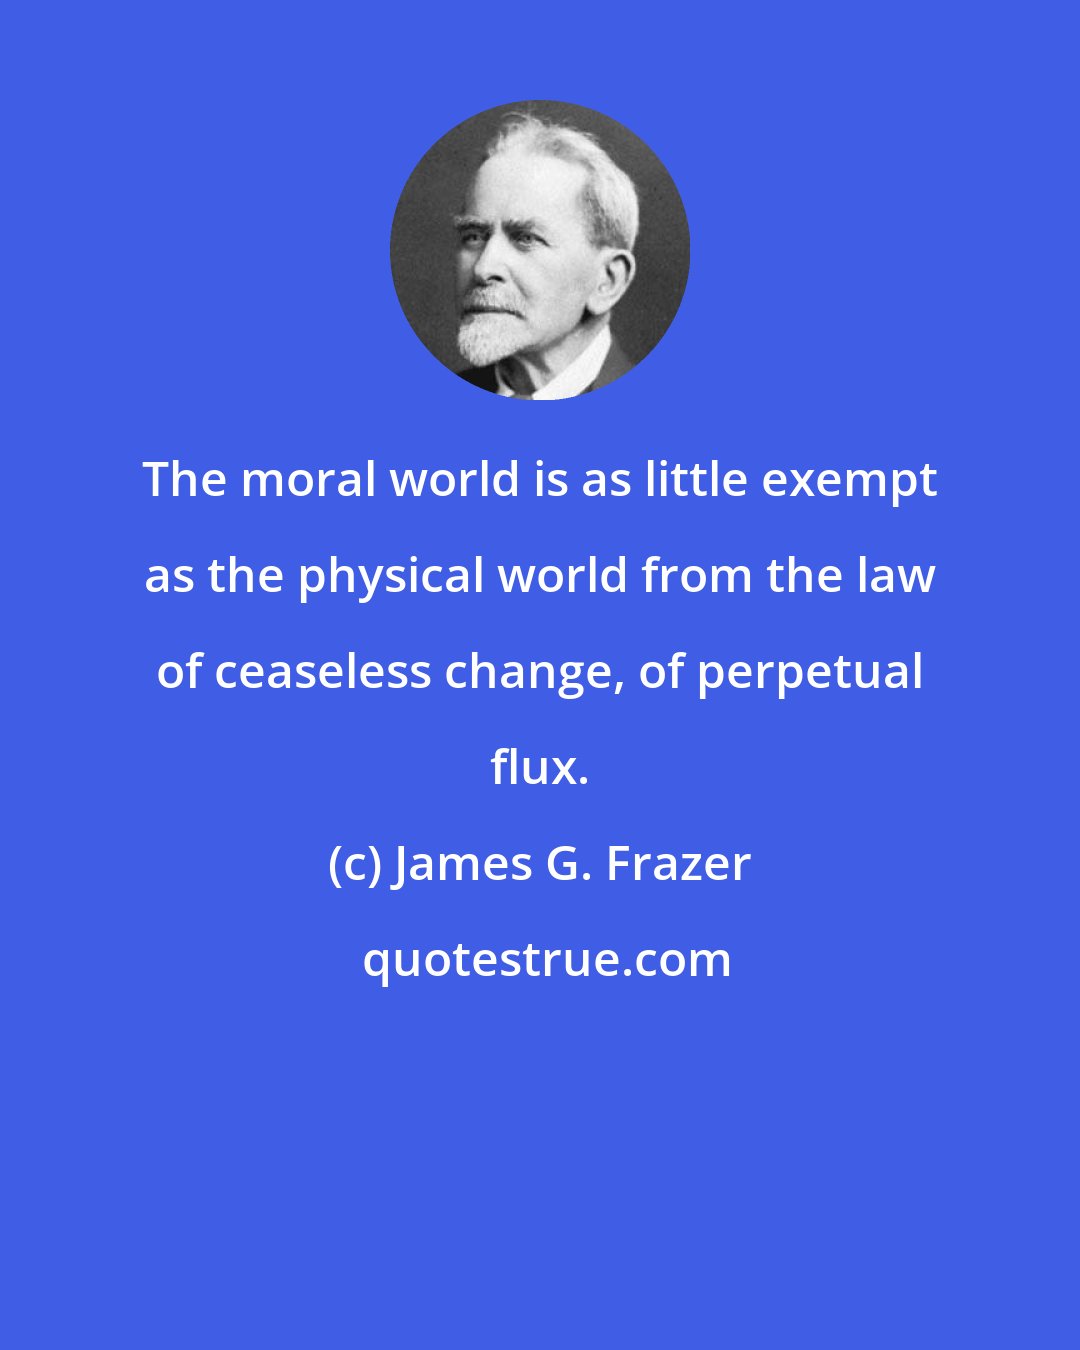 James G. Frazer: The moral world is as little exempt as the physical world from the law of ceaseless change, of perpetual flux.